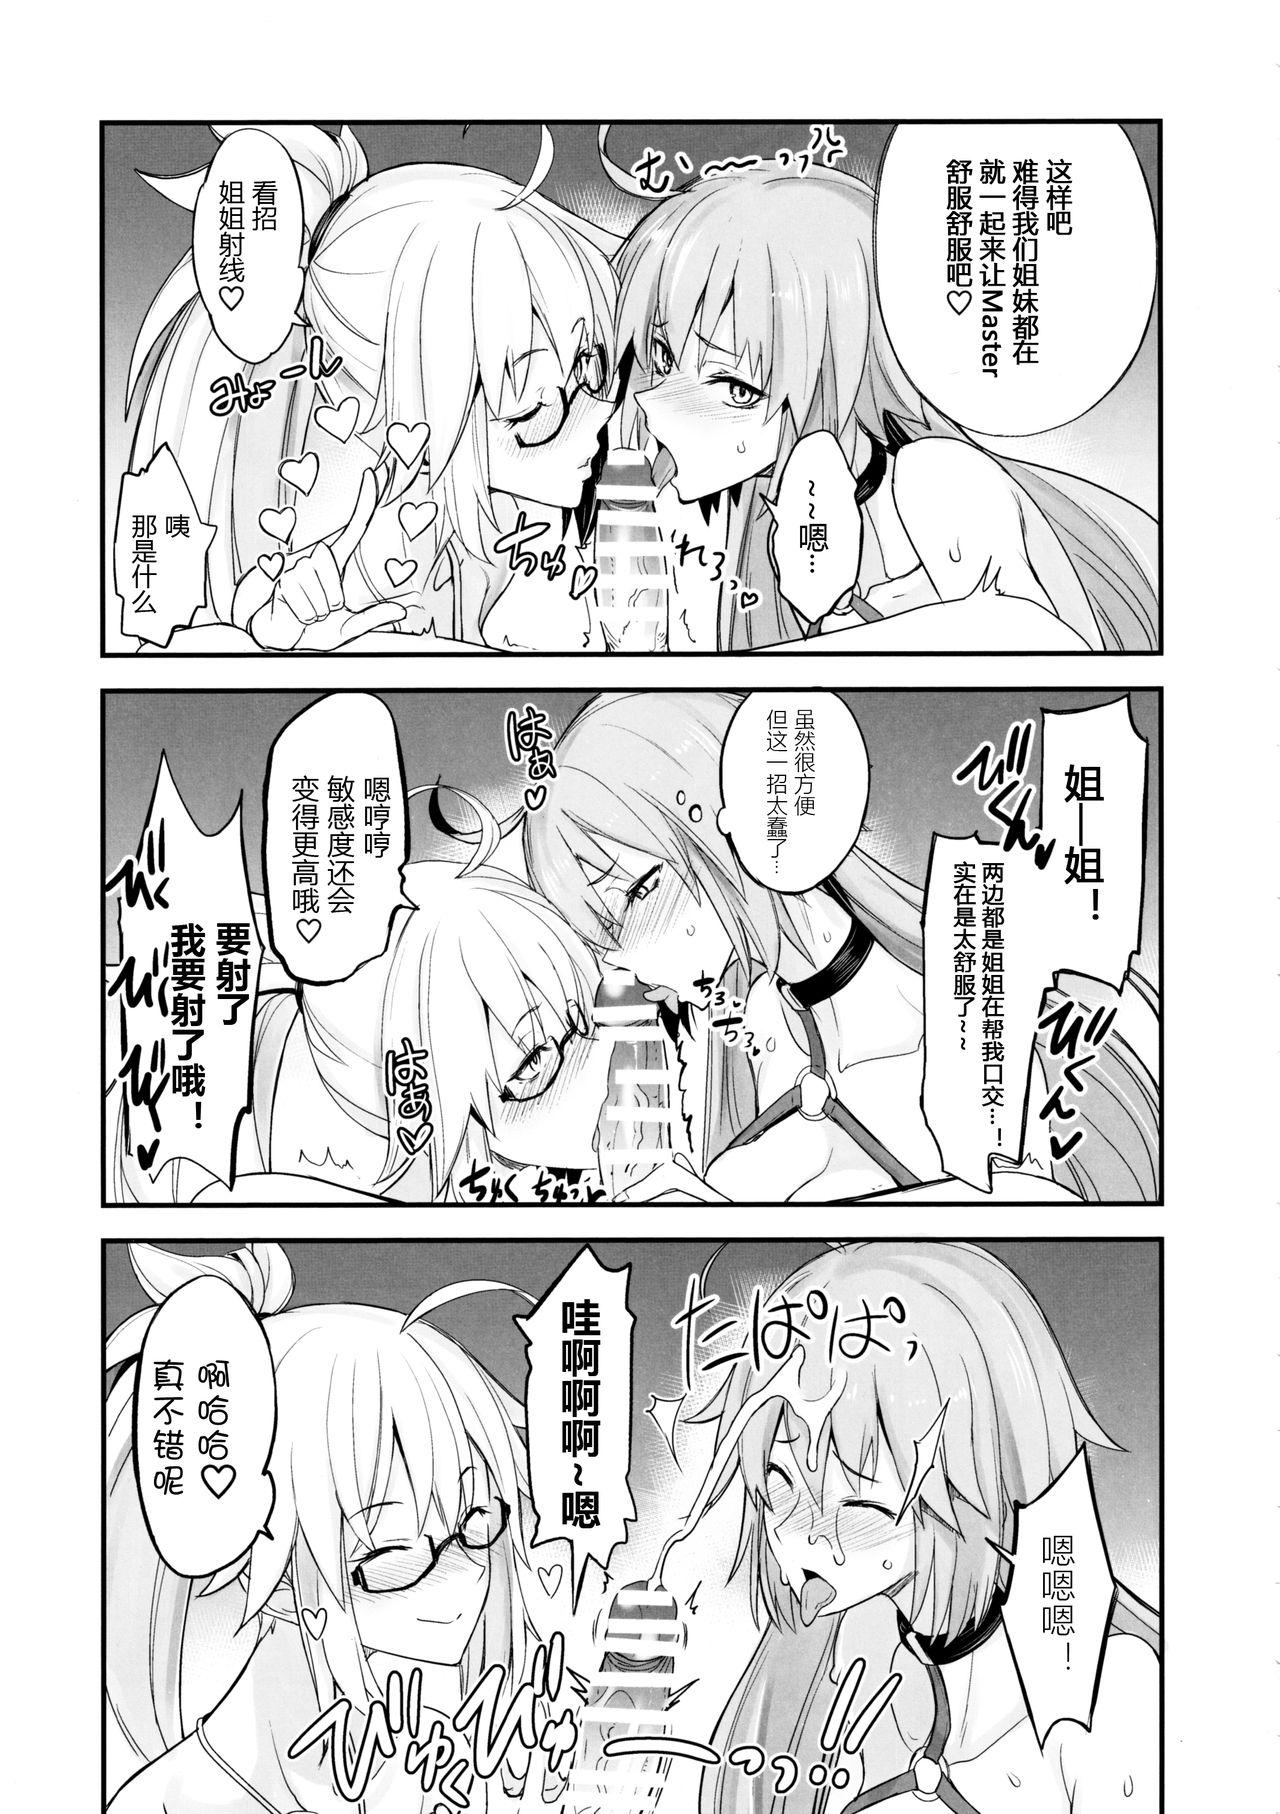 Fucking W Jeanne vs Master - Fate grand order Perverted - Page 11